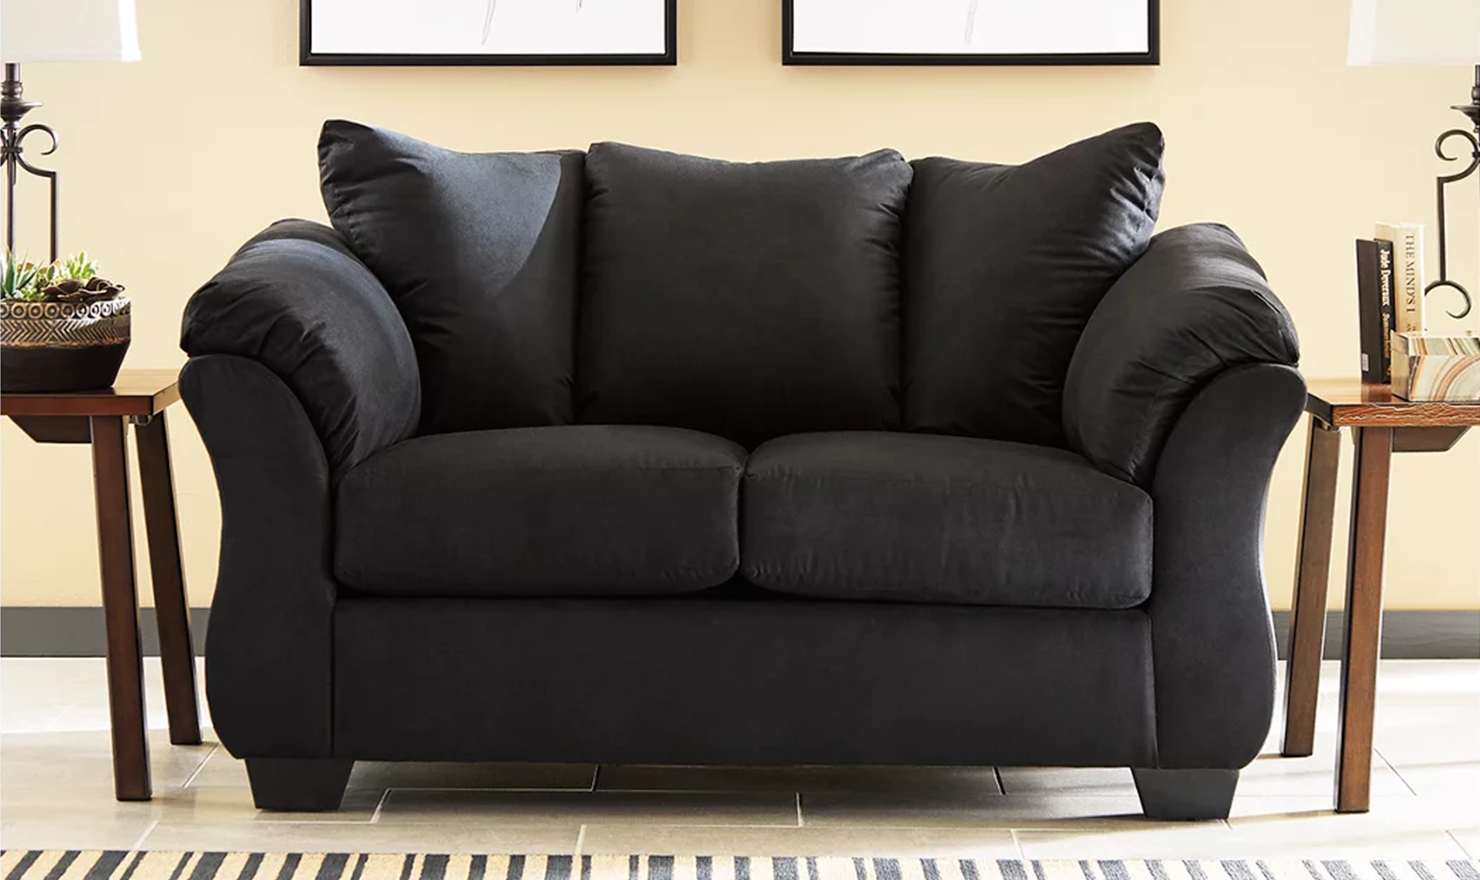 Darcy Loveseat With Pillow Arms